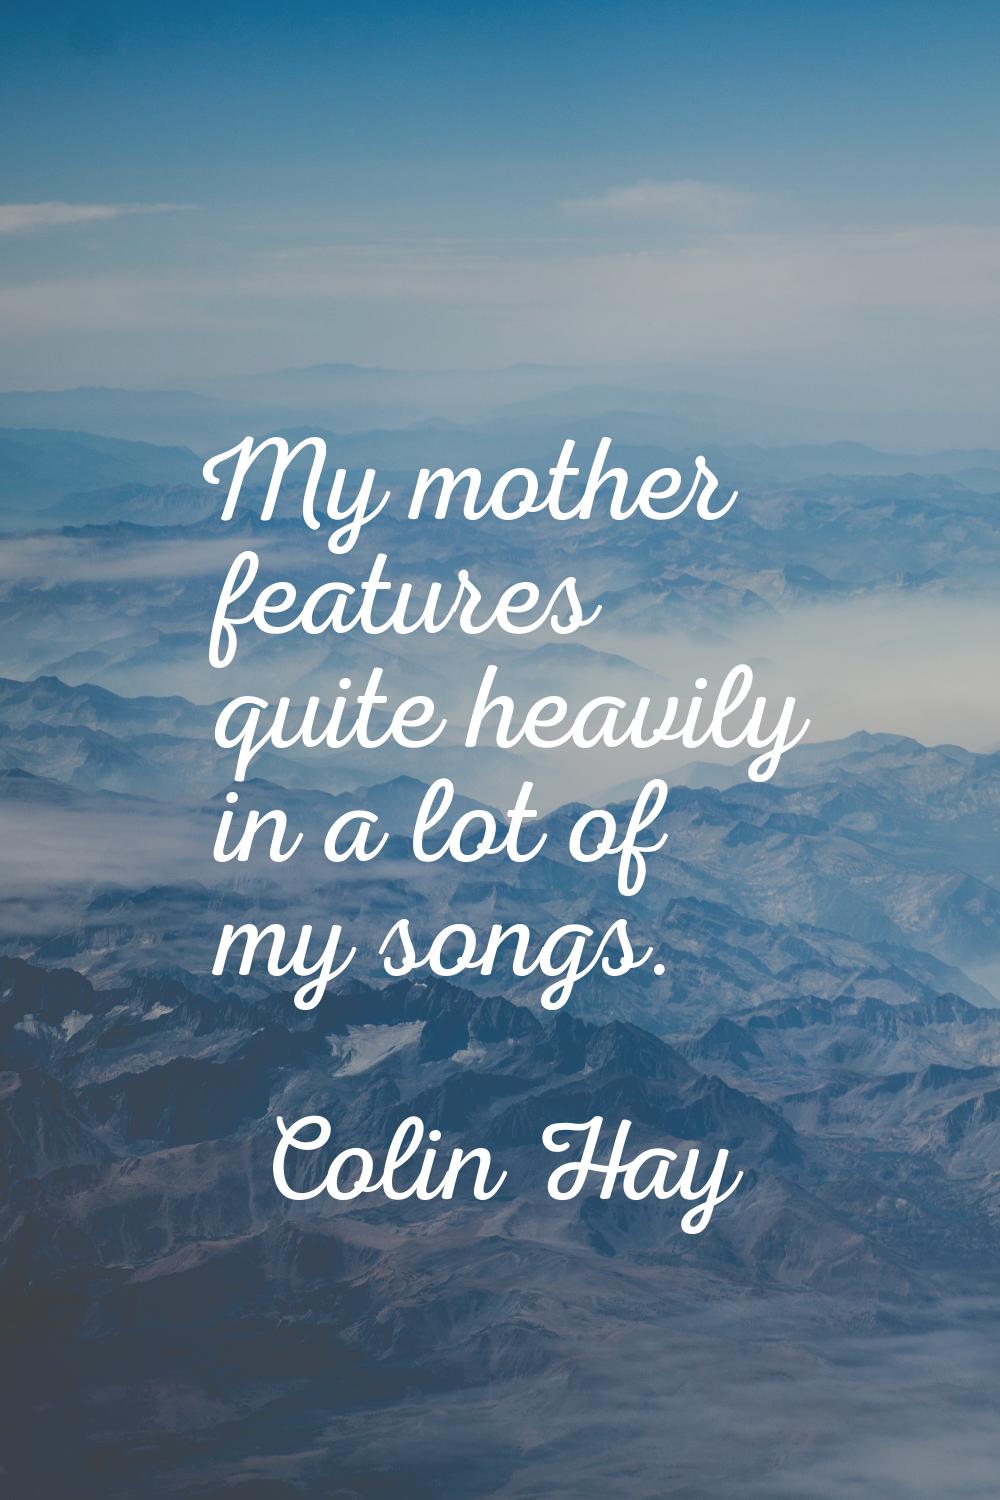 My mother features quite heavily in a lot of my songs.